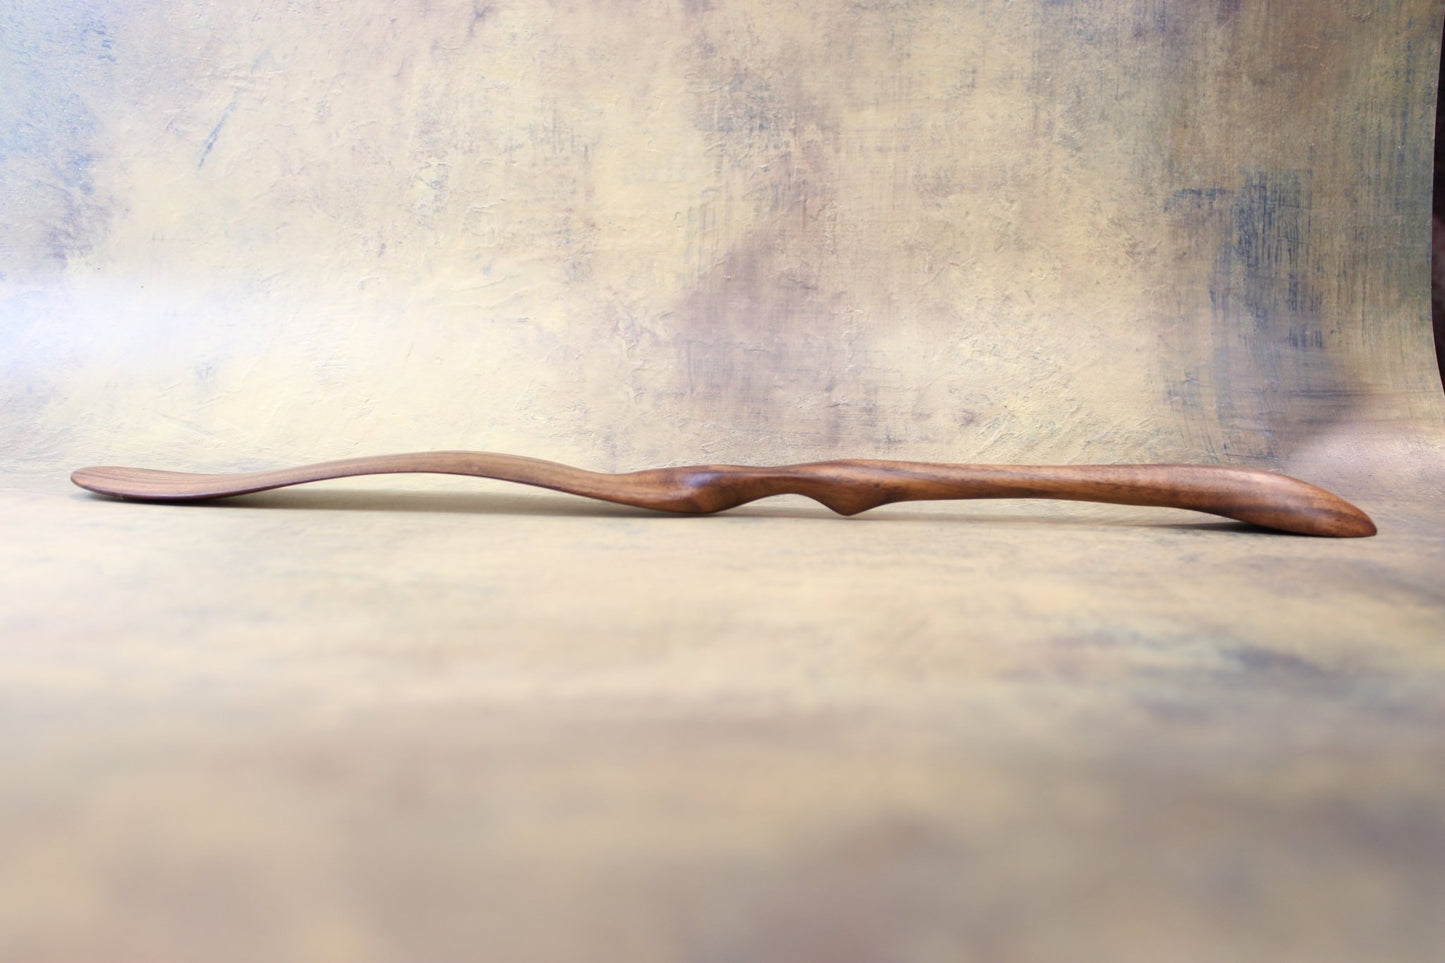 Hand Carved Double Sided Spoon & Scottish Spurtle for Mixing, Stirring & portioning spices made from Sustainably Sourced Walnut - Blue Sage Family Farm